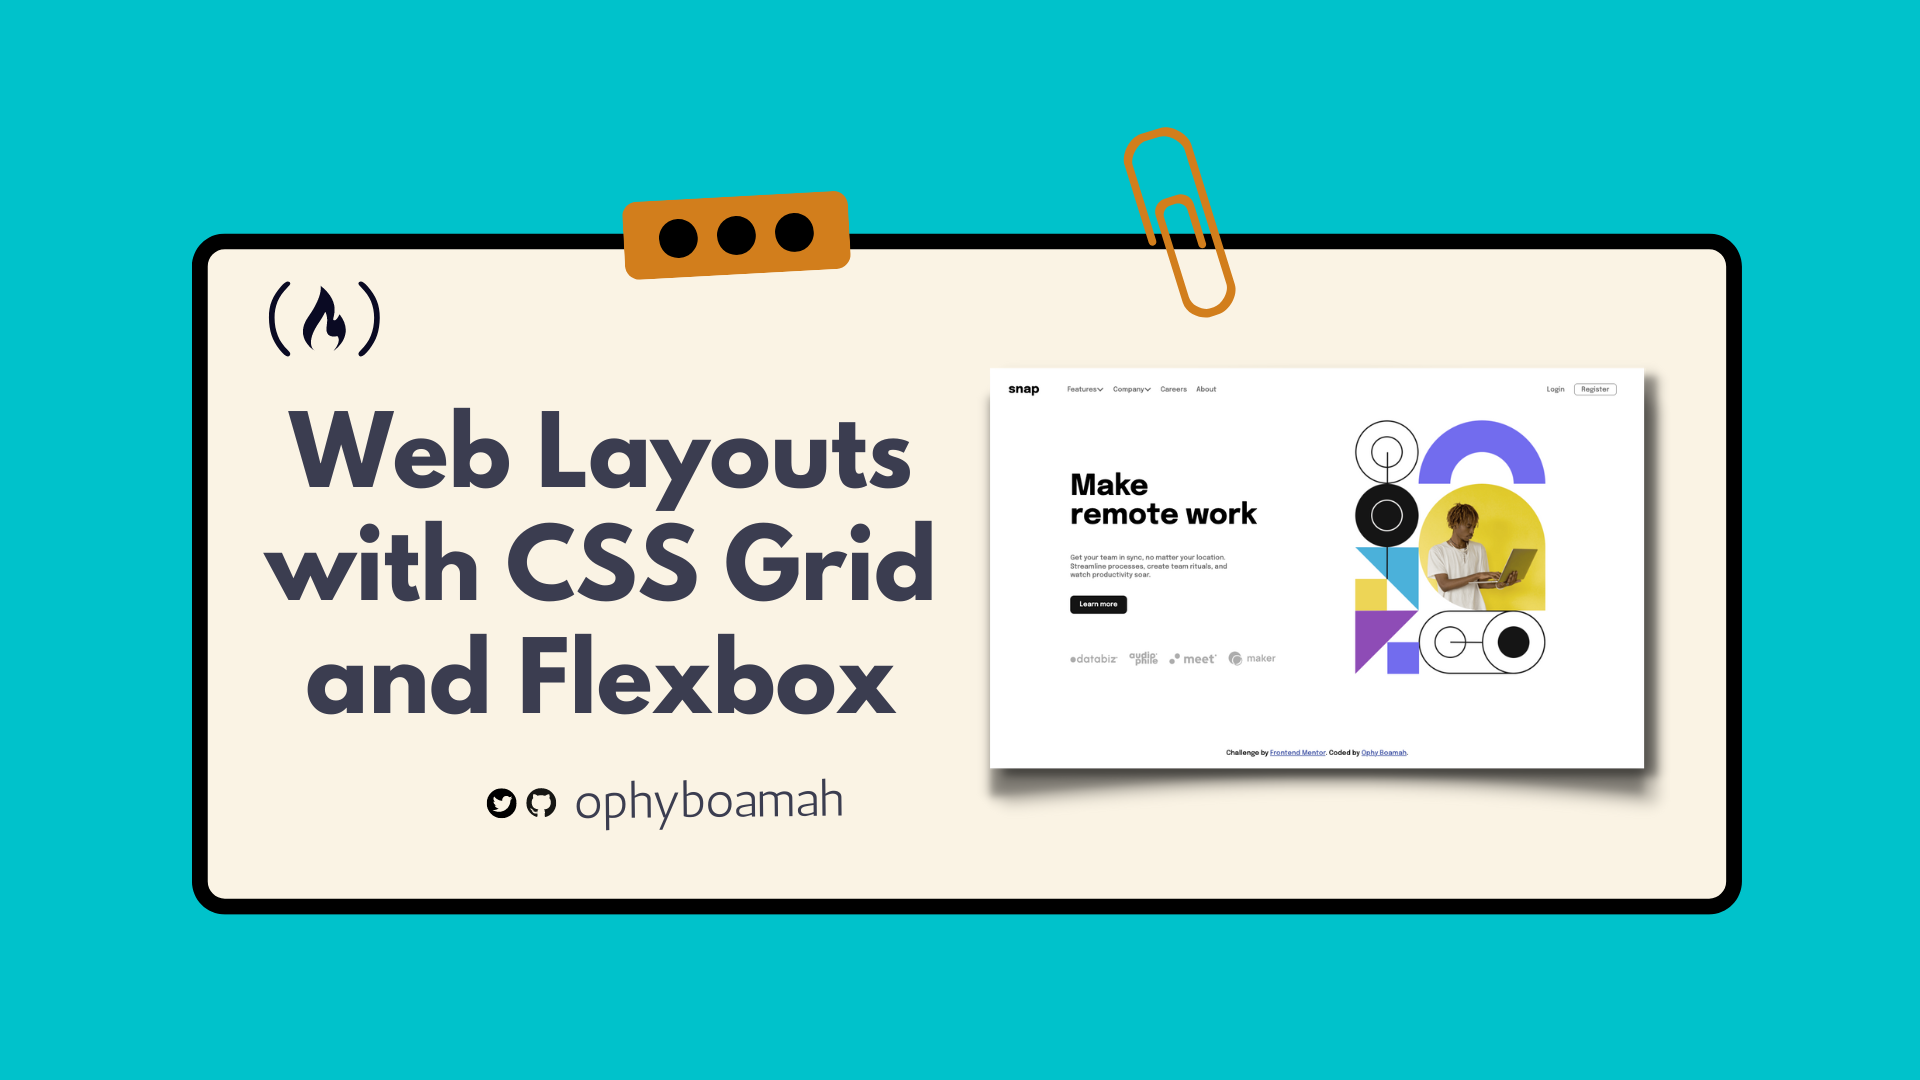 Web Layouts – How to Use CSS Grid and Flex to Create a Responsive Web Page